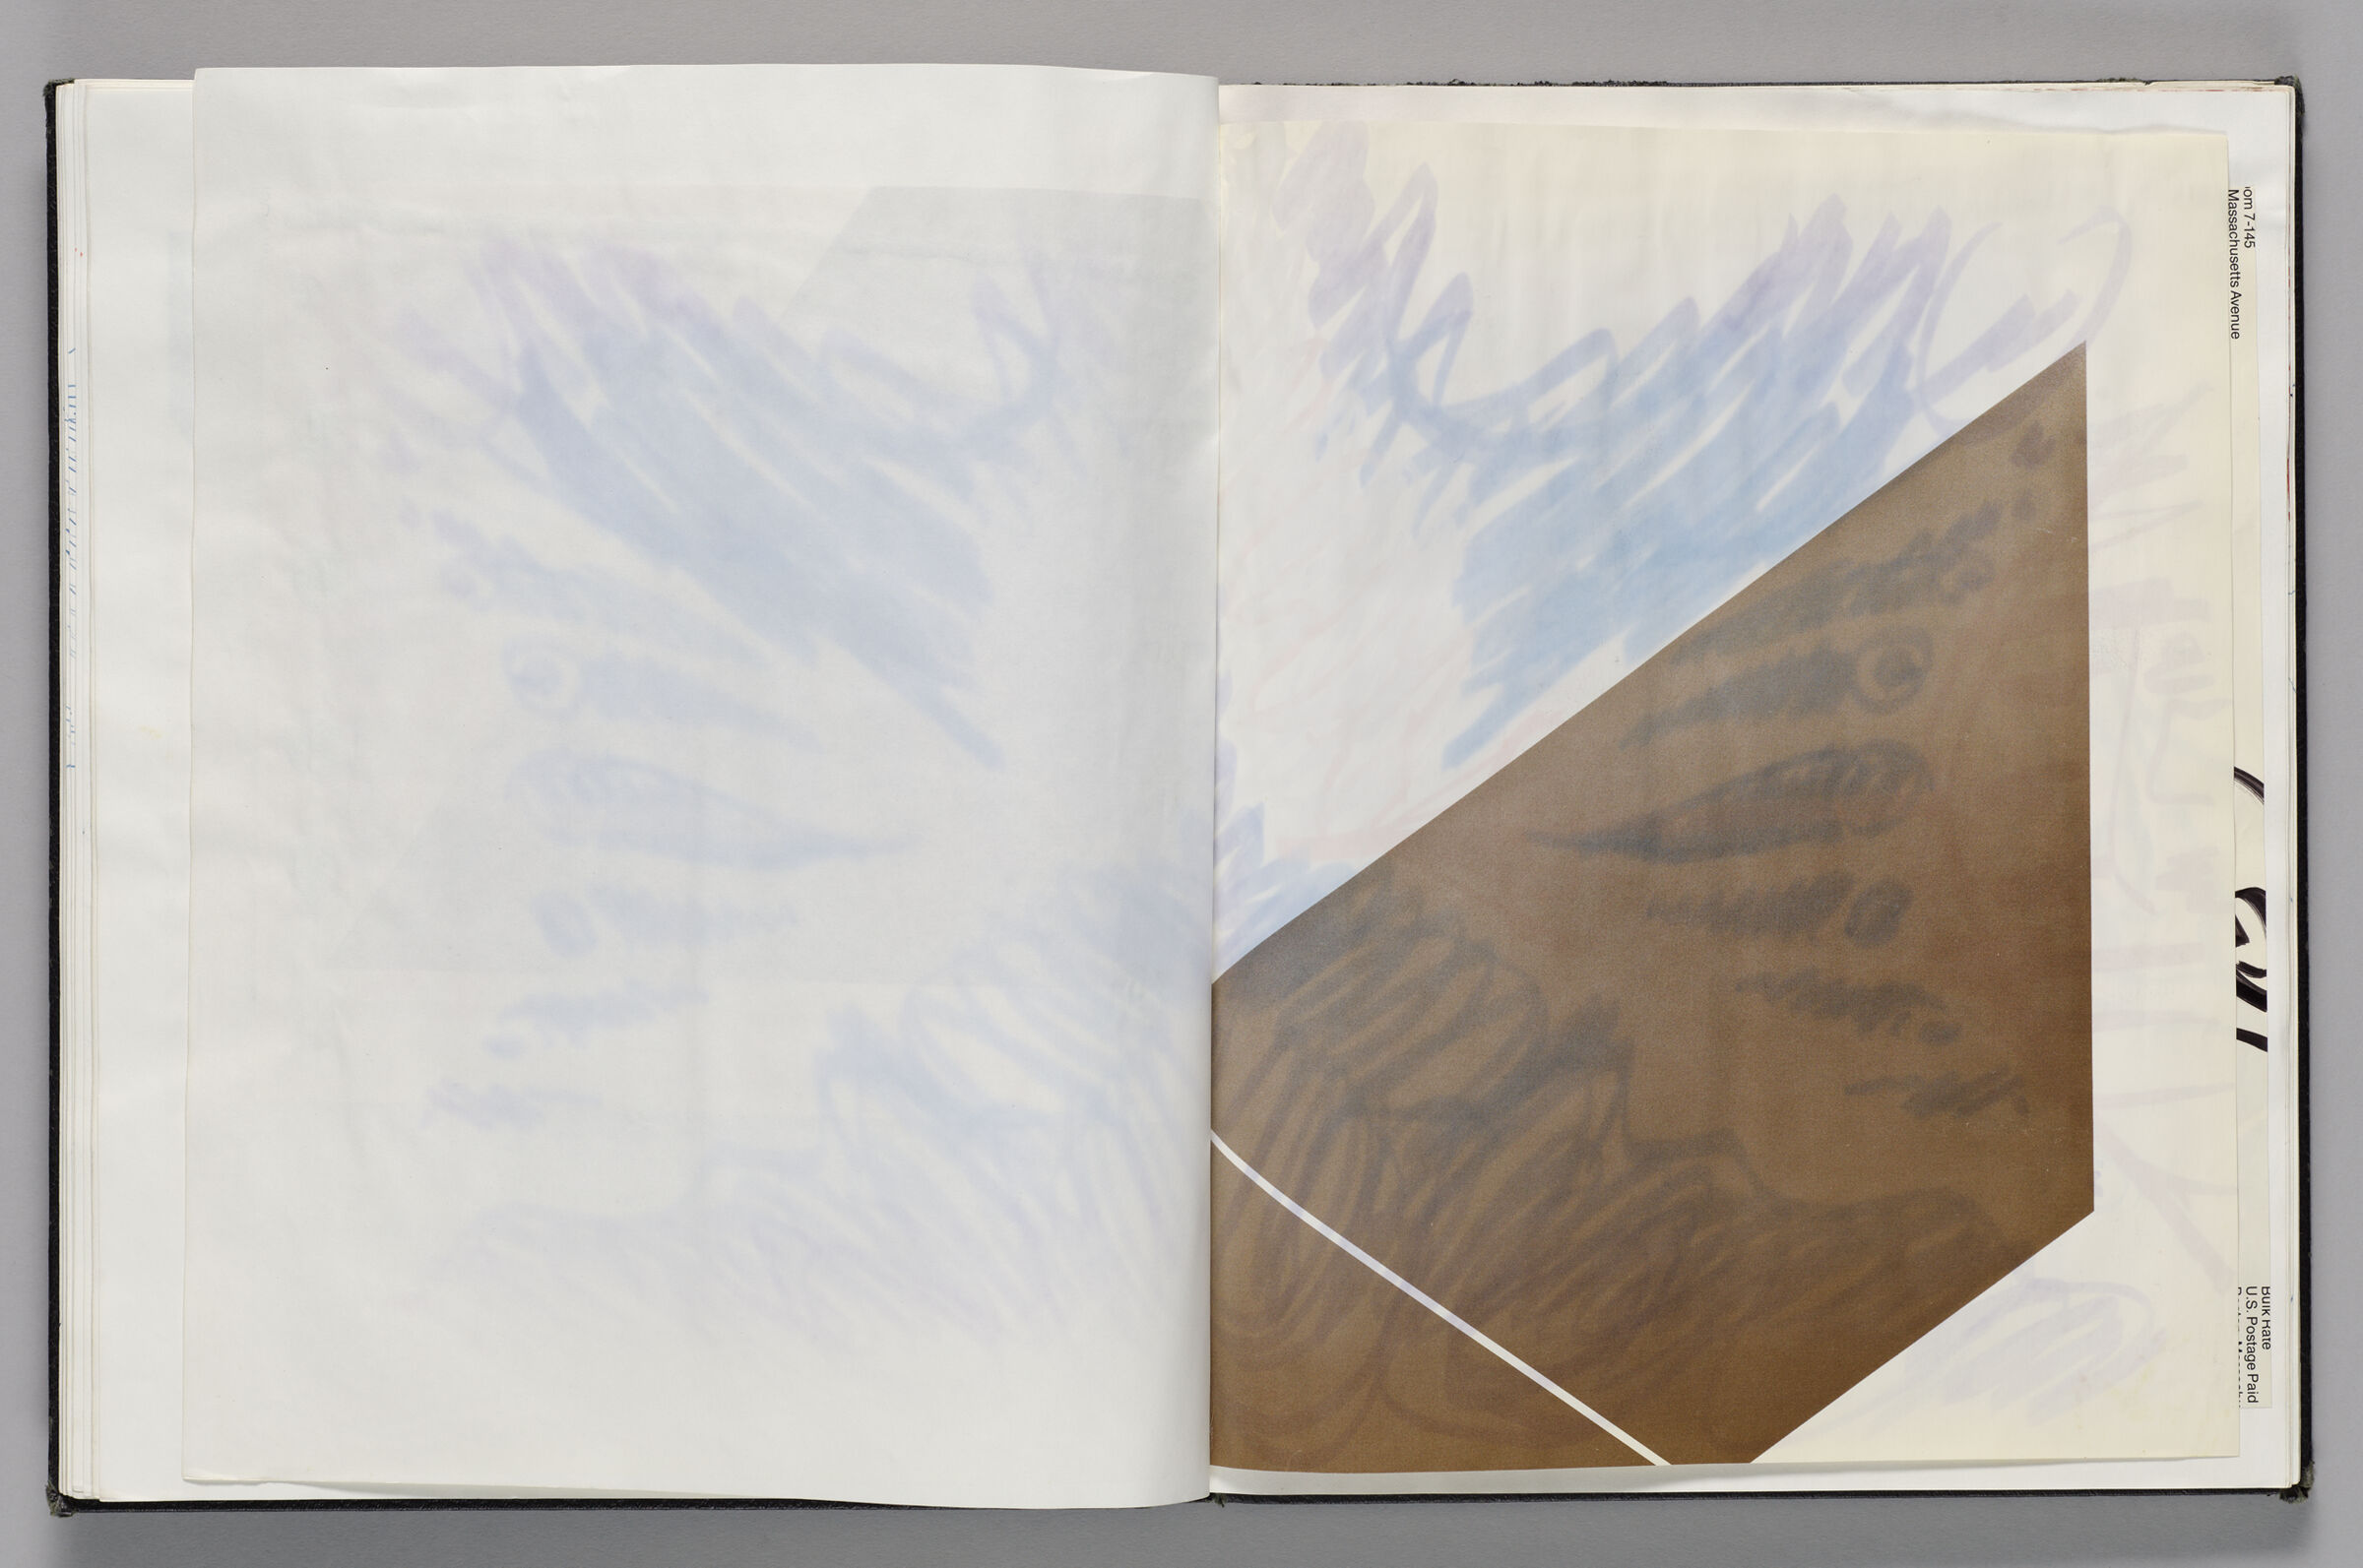 Untitled (Pasted Sketch, Left Page); Untitled (Pasted Sketches, Right Page)